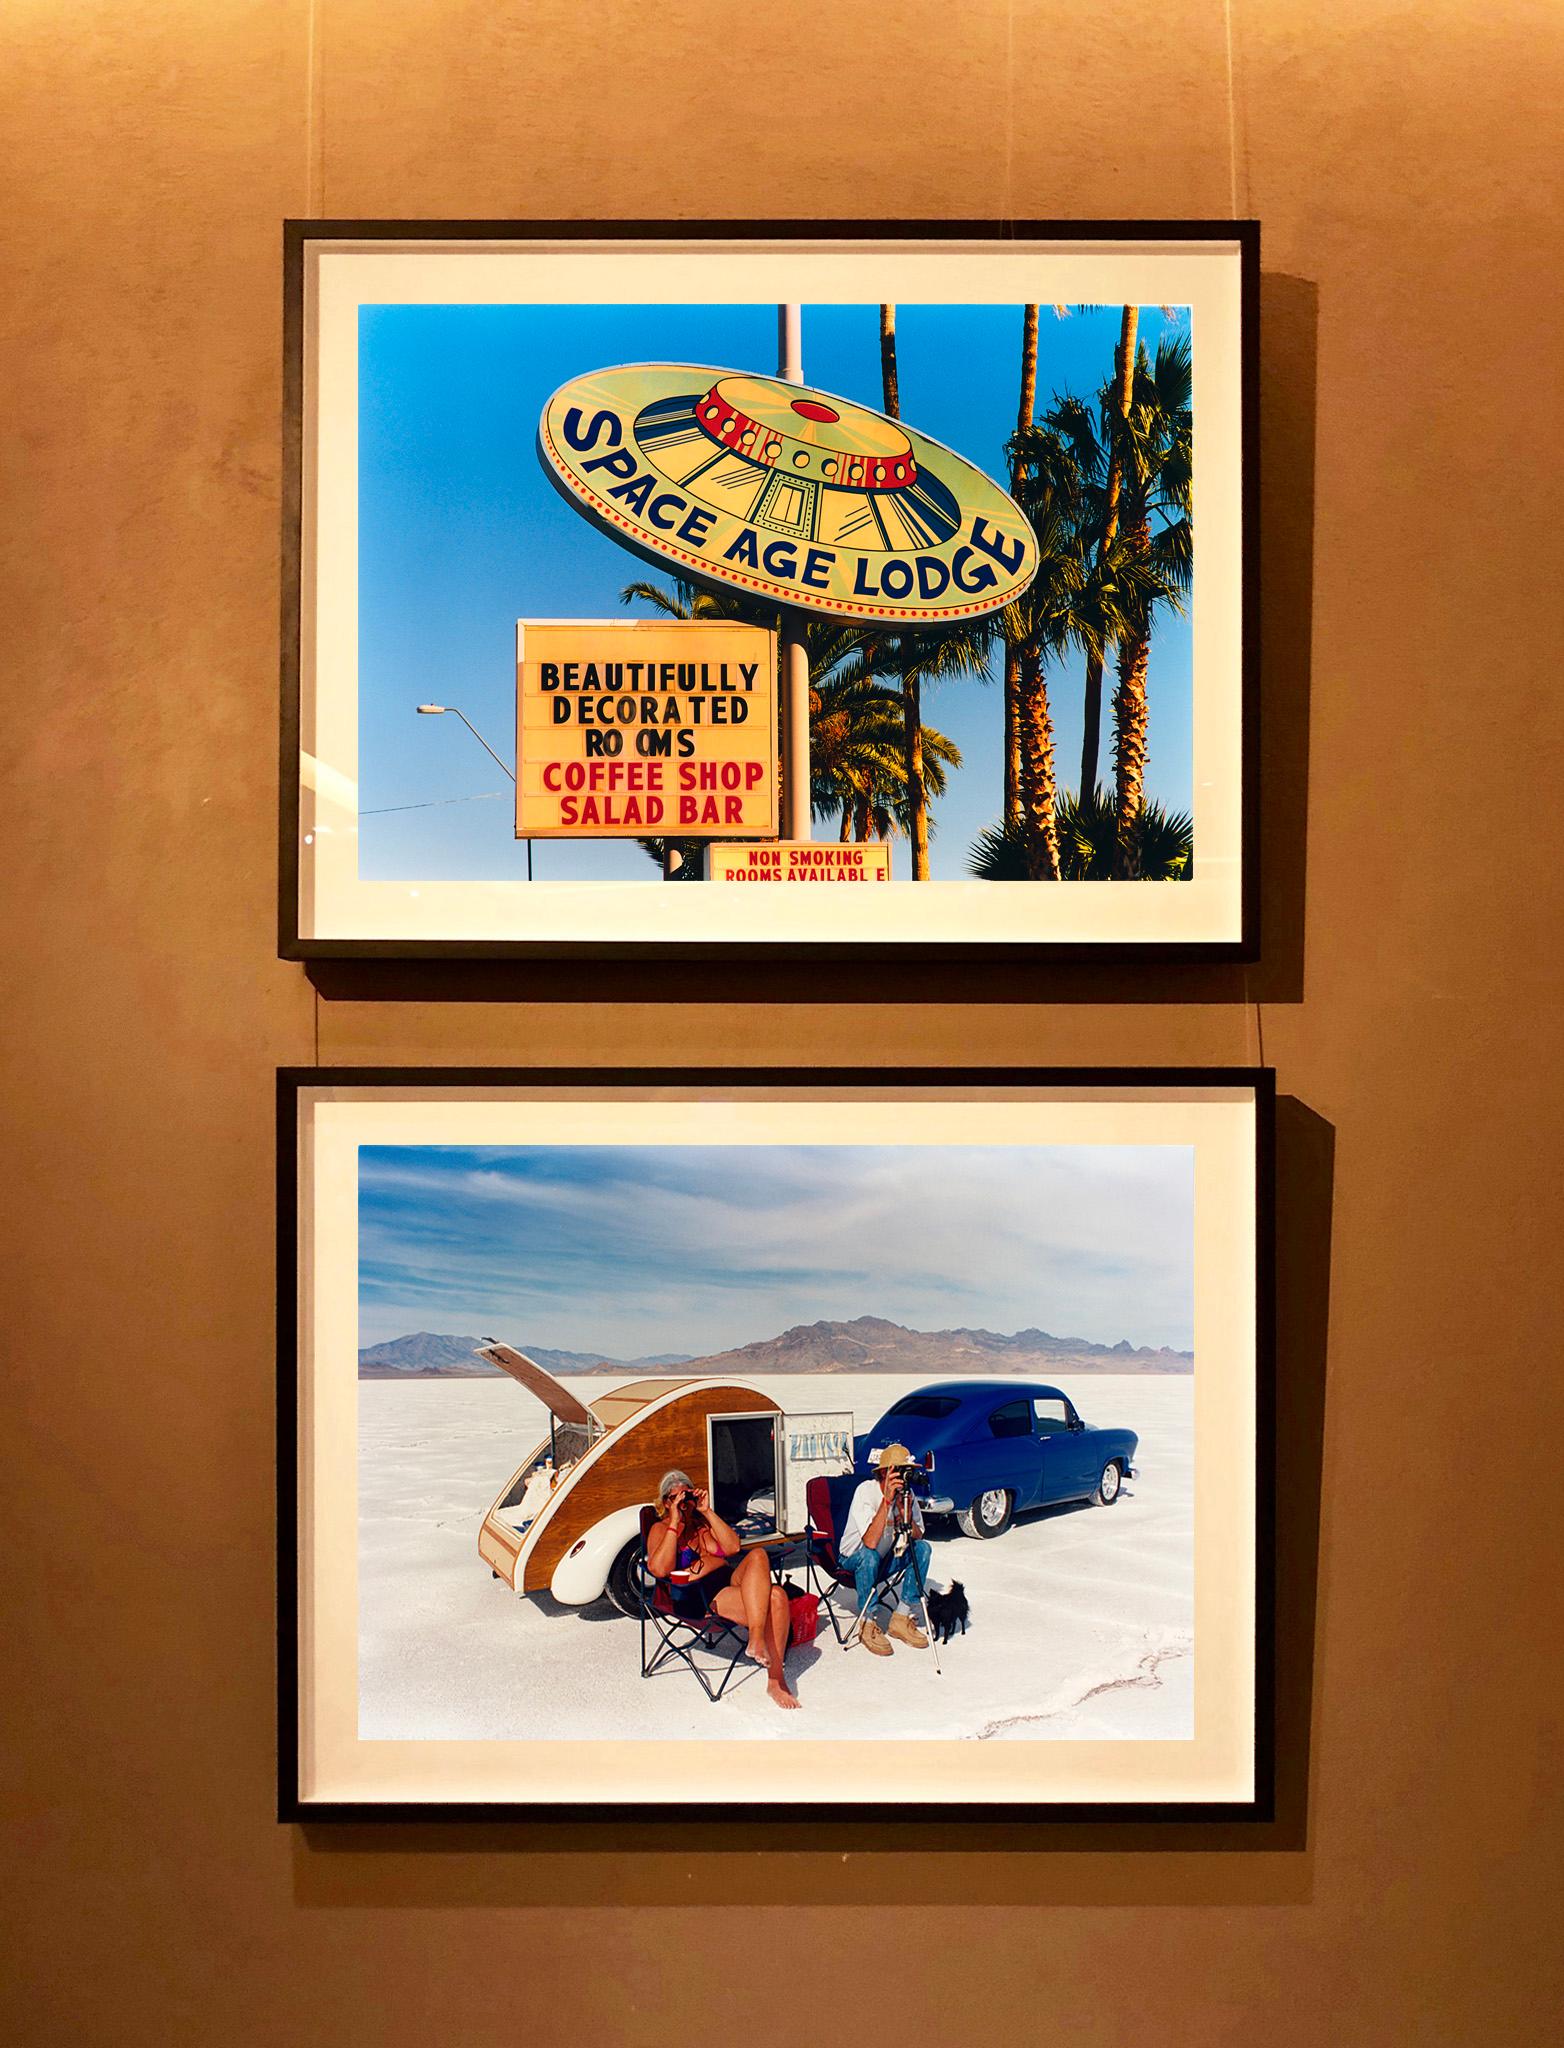 Googie sign photography at its finest, the iconic and memorable Space Age Lodge, in Gila Bend, Arizona. Photograph by Richard Heeps from his Dream in Colour series, looking like a painting rather than a photograph.

This artwork is a limited edition